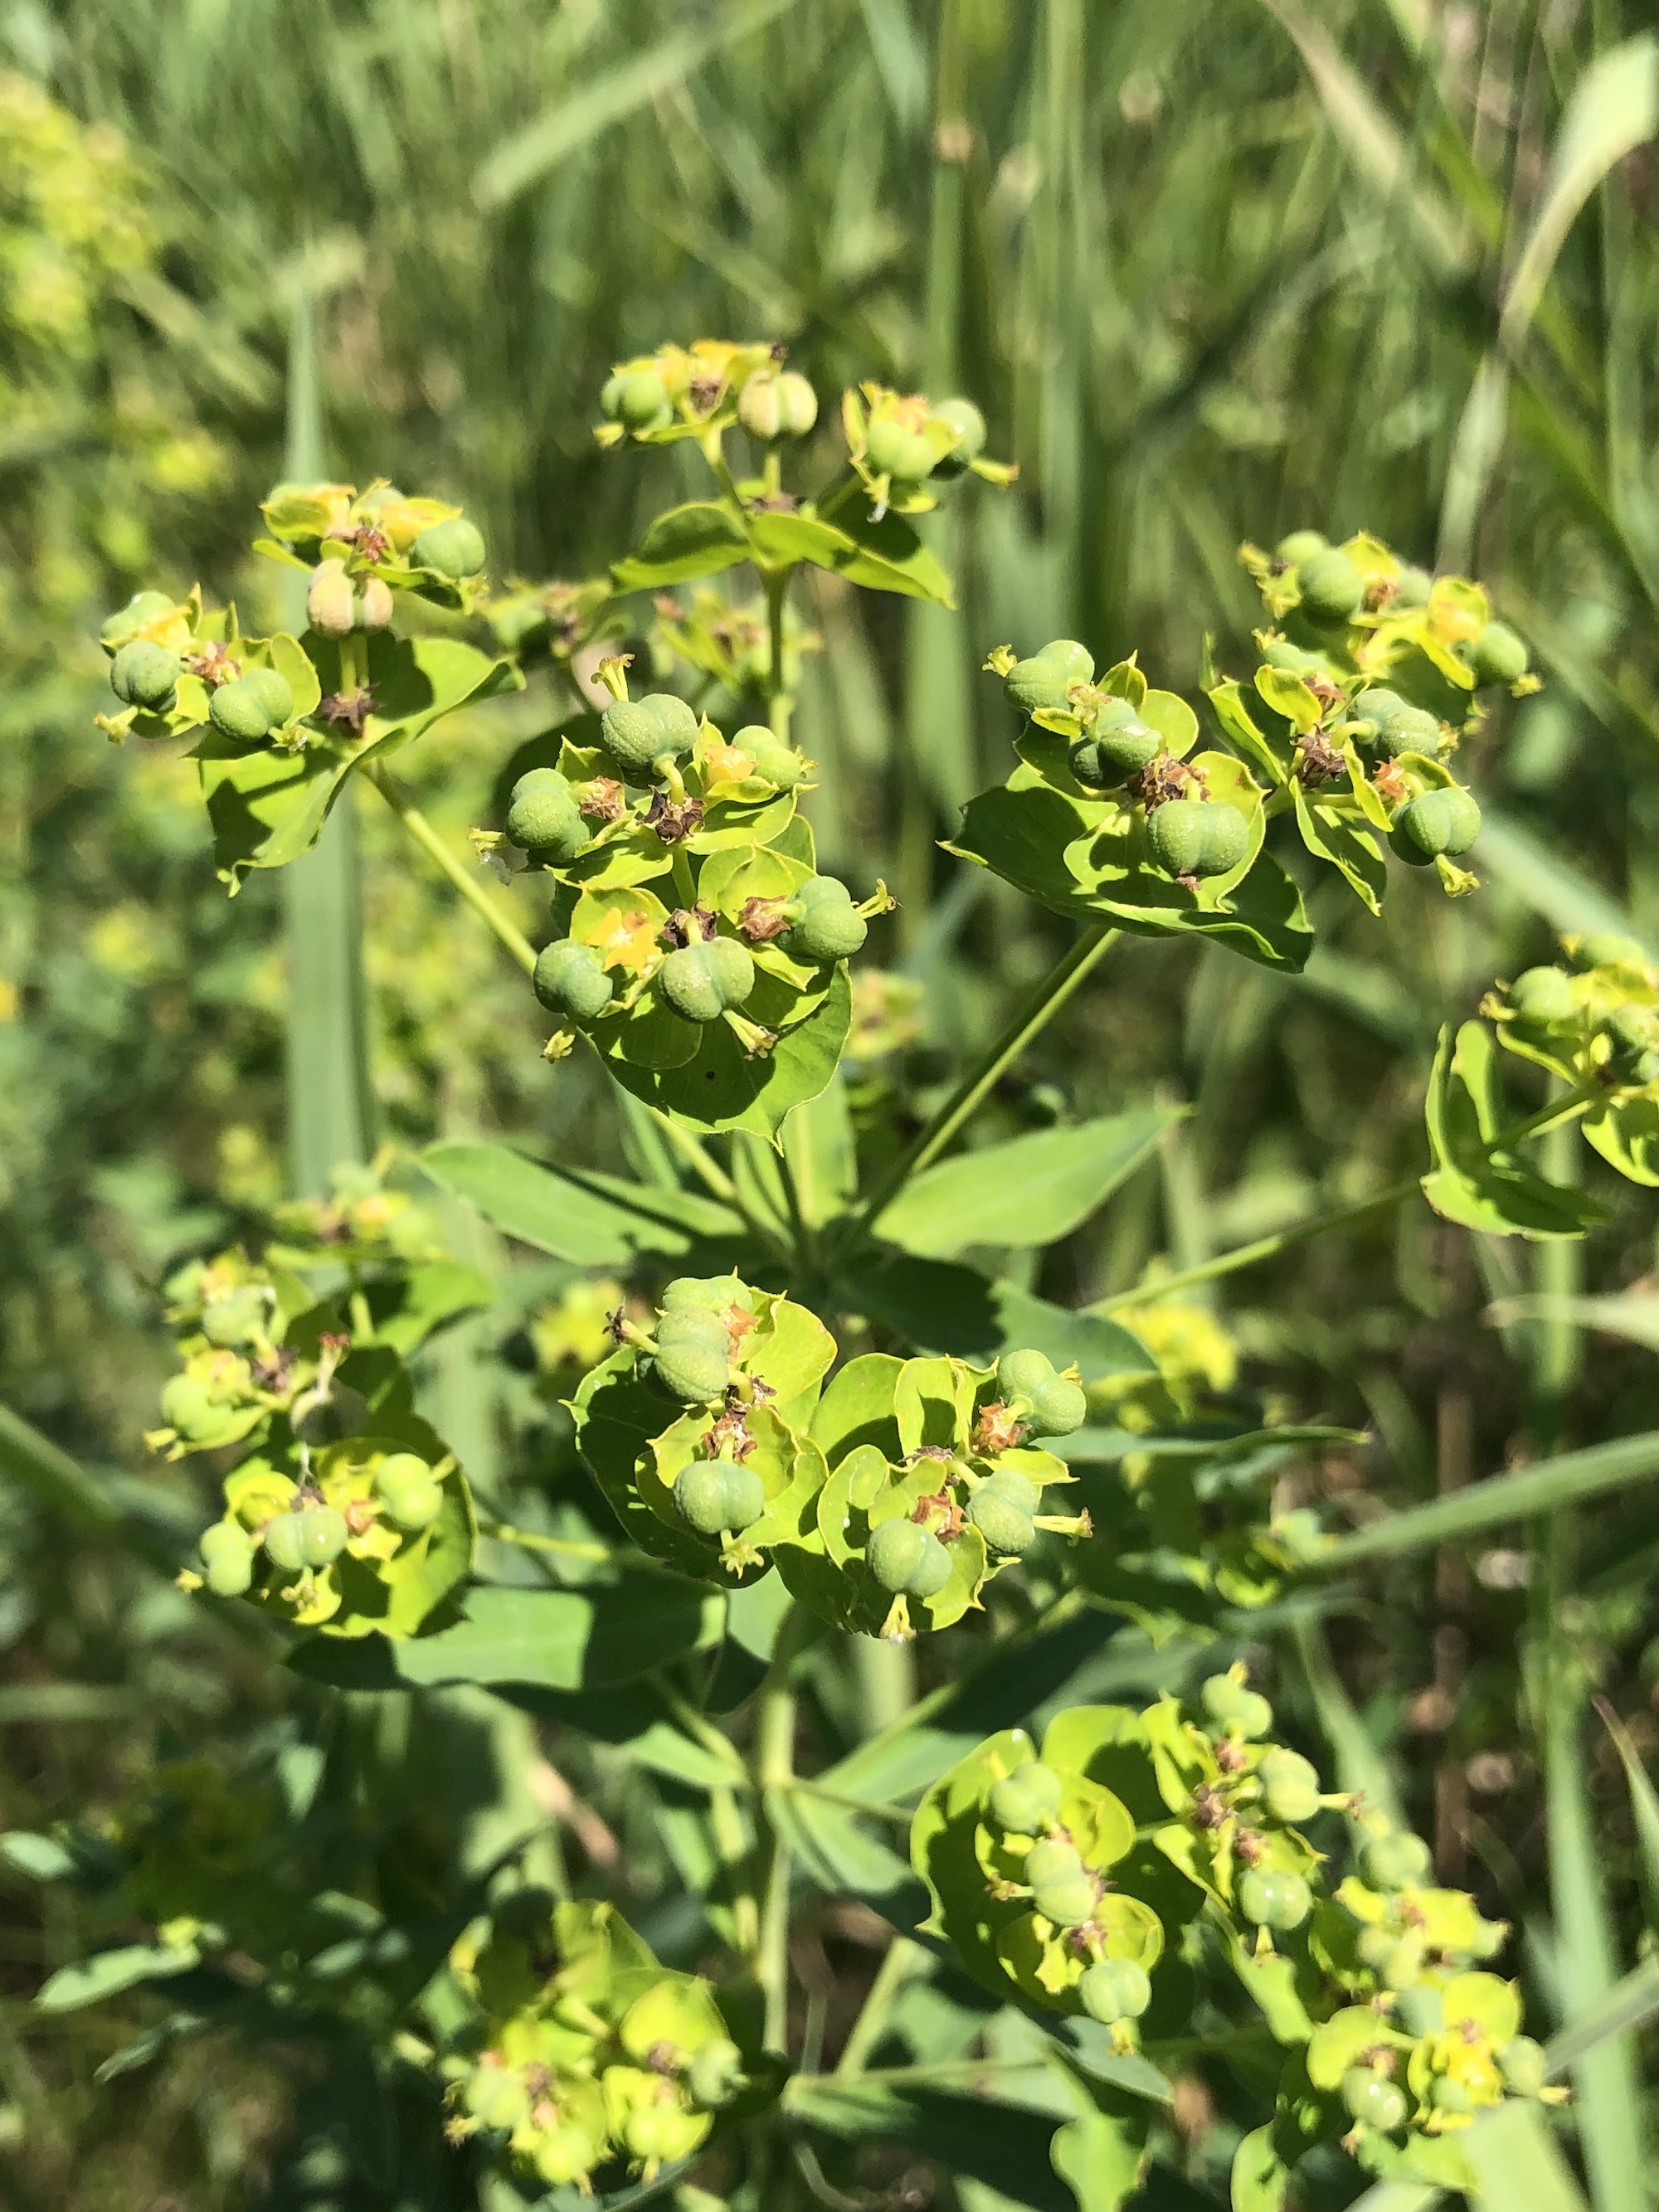 Leafy Spurge with detail of flowers and immature seeds near Whitney Way in Madison, Wisconsin on June 22, 2021.